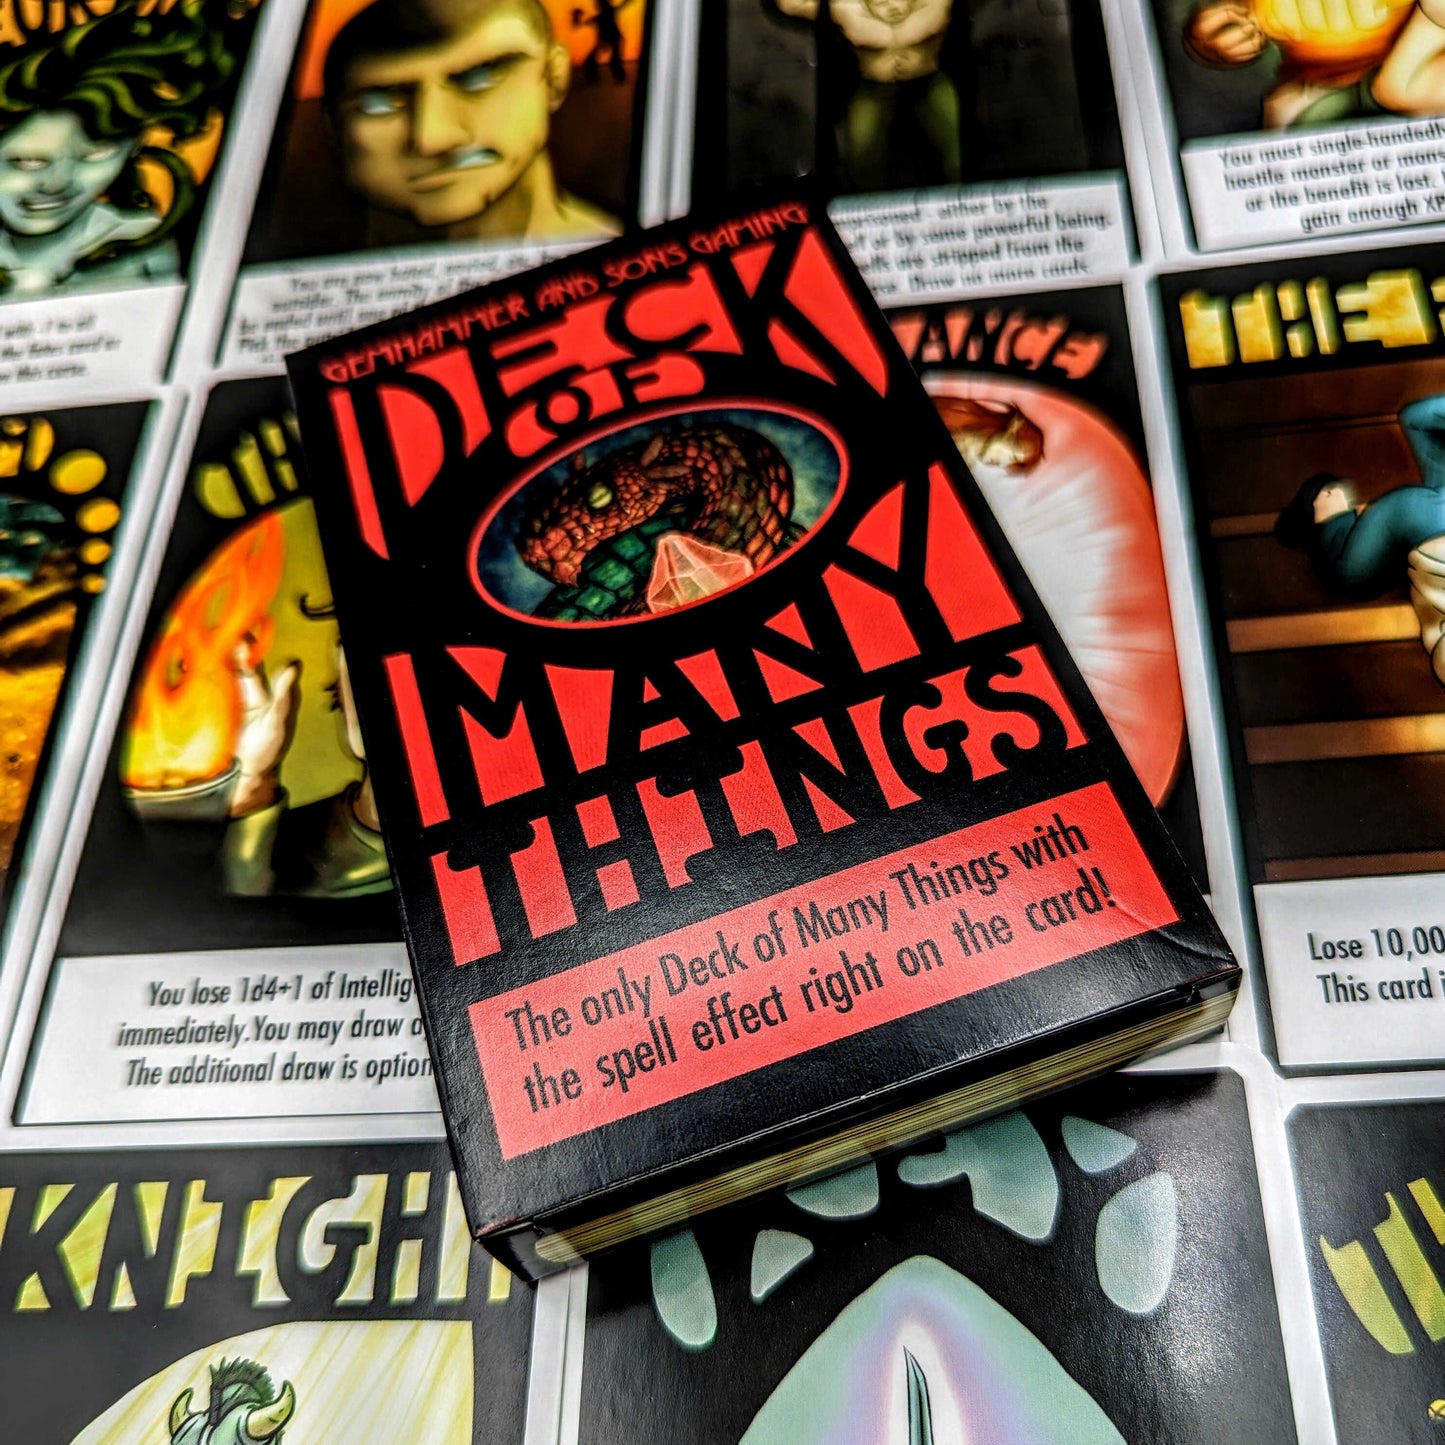 Deck of Many Things